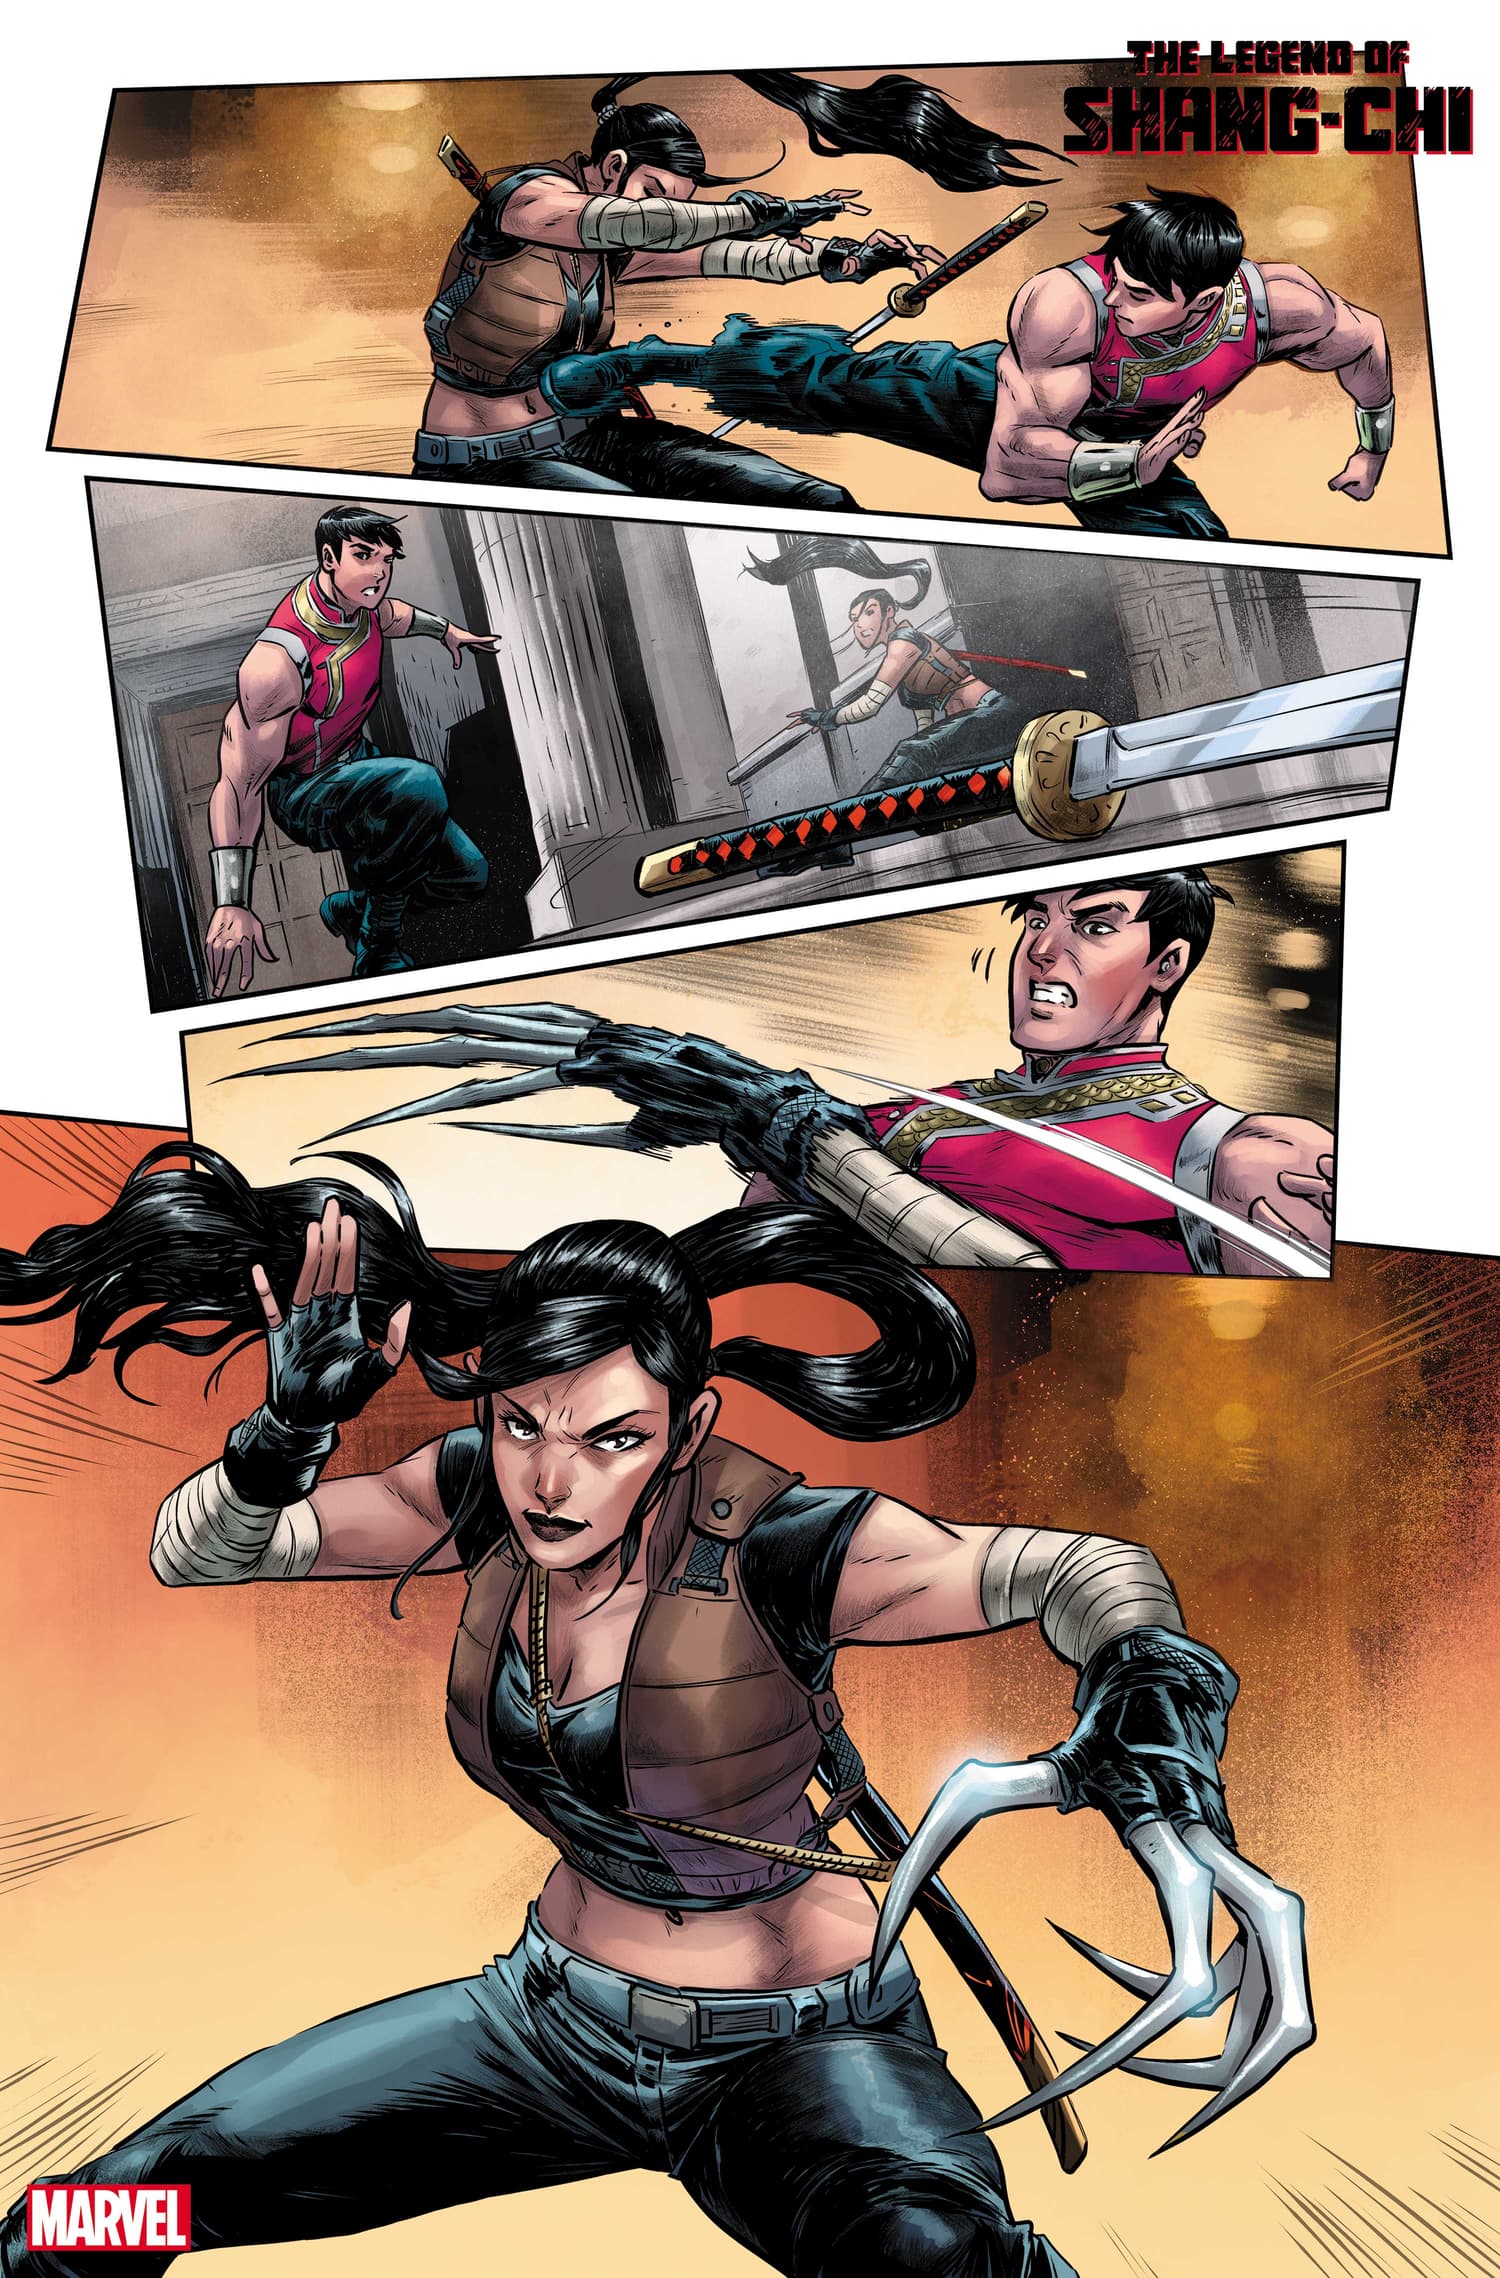 THE LEGEND OF SHANG-CHI #1 art by Andie Tong with colors by Rachelle Rosenberg